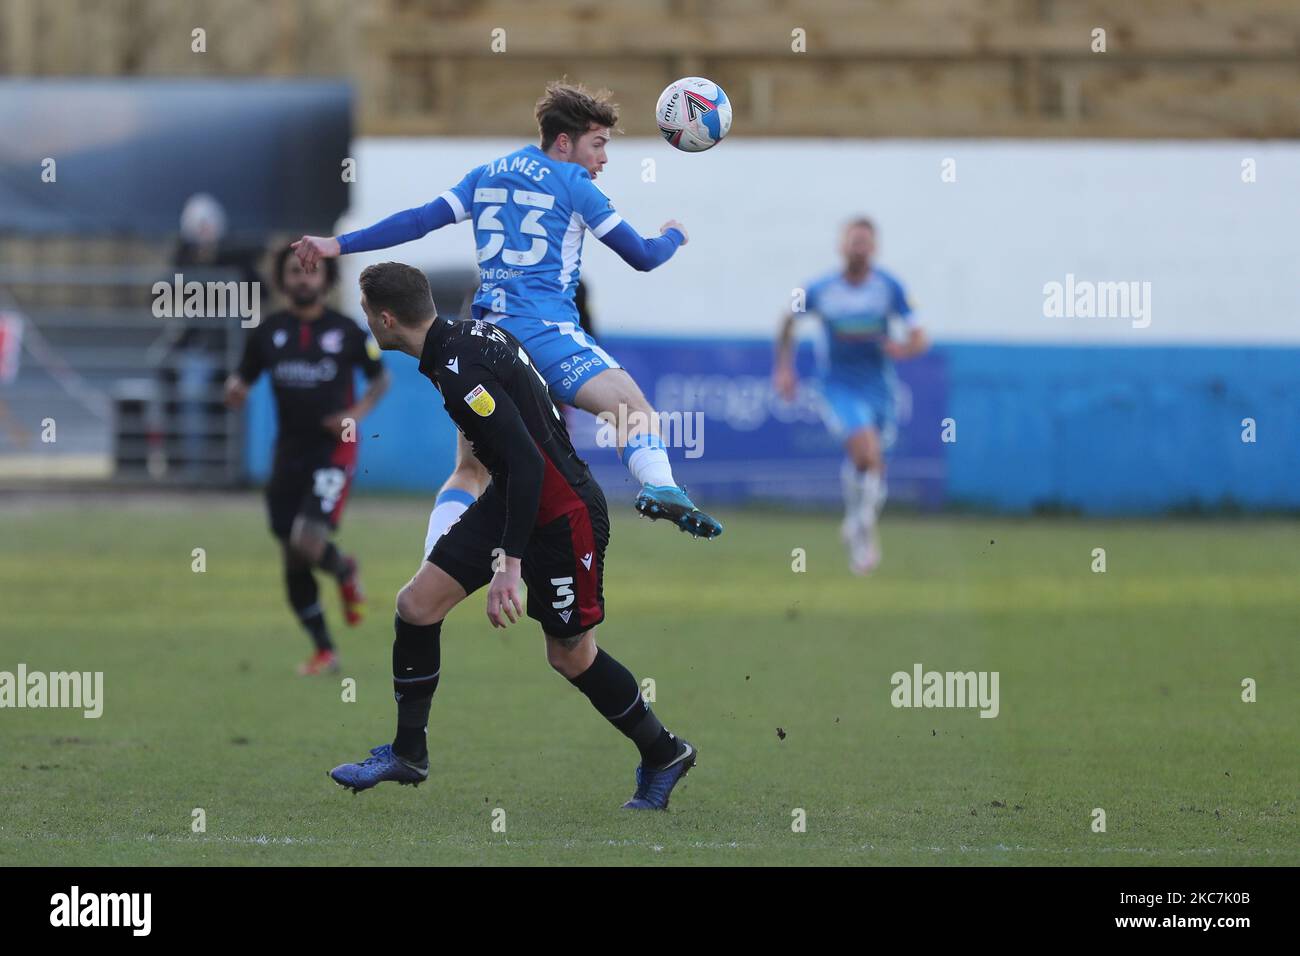 Luke James of Barrow contests a header with George Tait of Scunthorpe United during the Sky Bet League 2 match between Barrow and Scunthorpe United at the Holker Street, Barrow-in-Furness, England on 16th January 2021. (Photo by Mark Fletcher/MI News/NurPhoto) Stock Photo